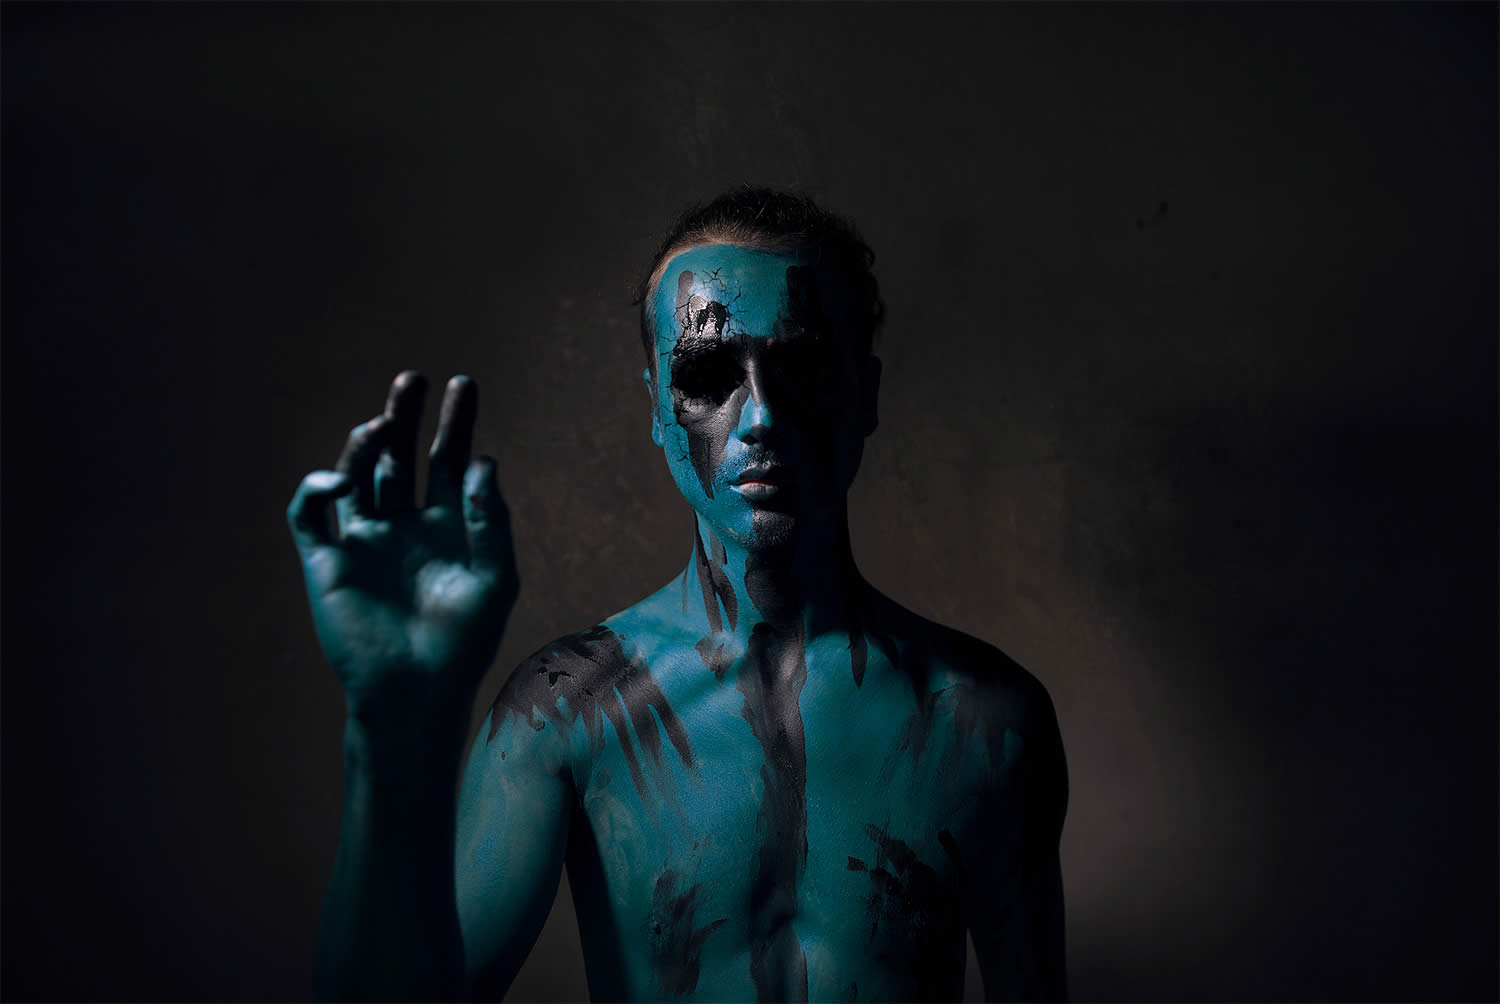 the viper, blue painted man,photo by kavan the kid